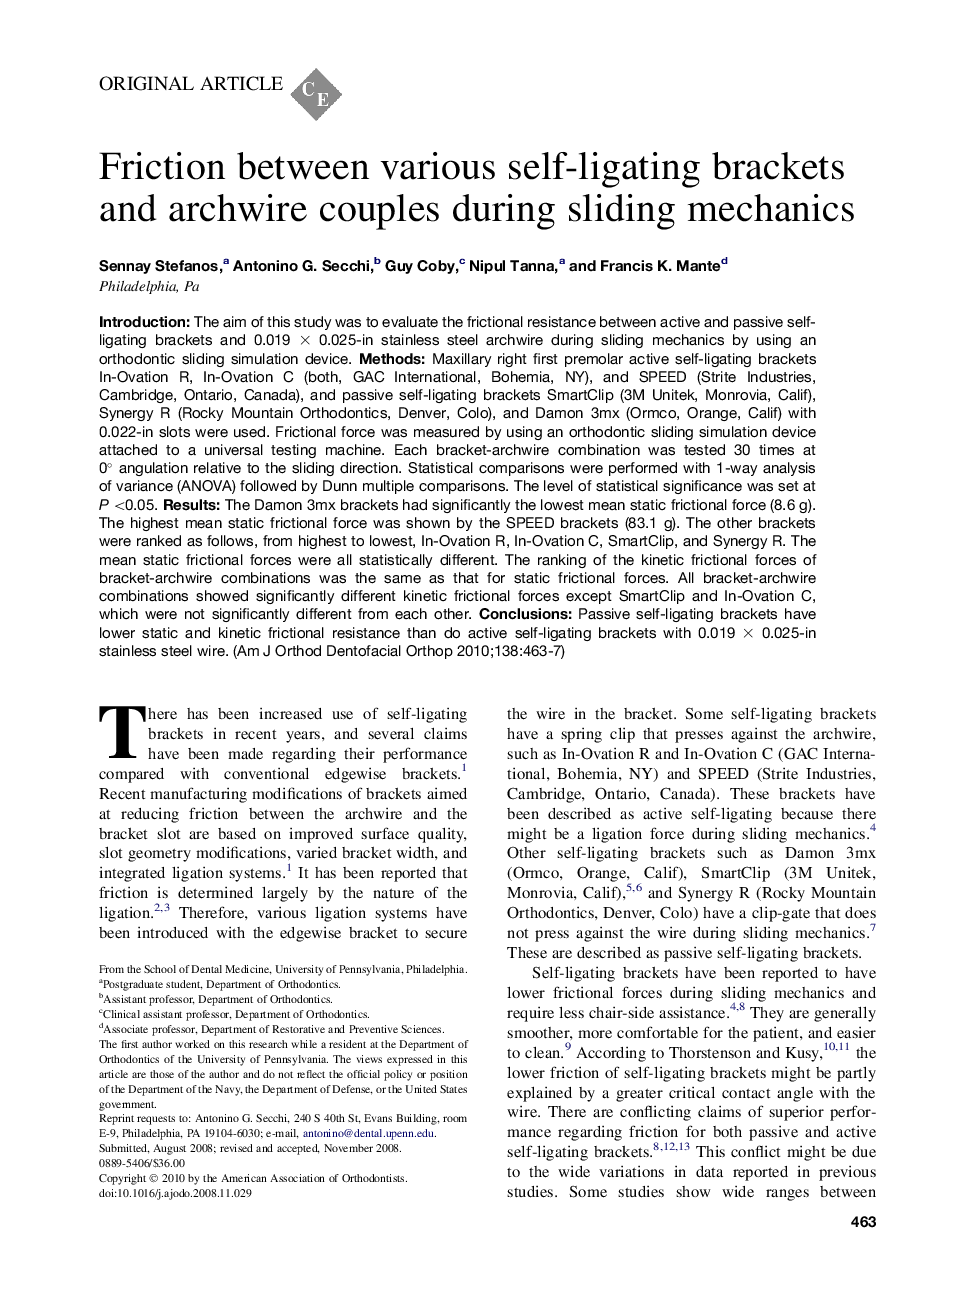 Friction between various self-ligating brackets and archwire couples during sliding mechanics 